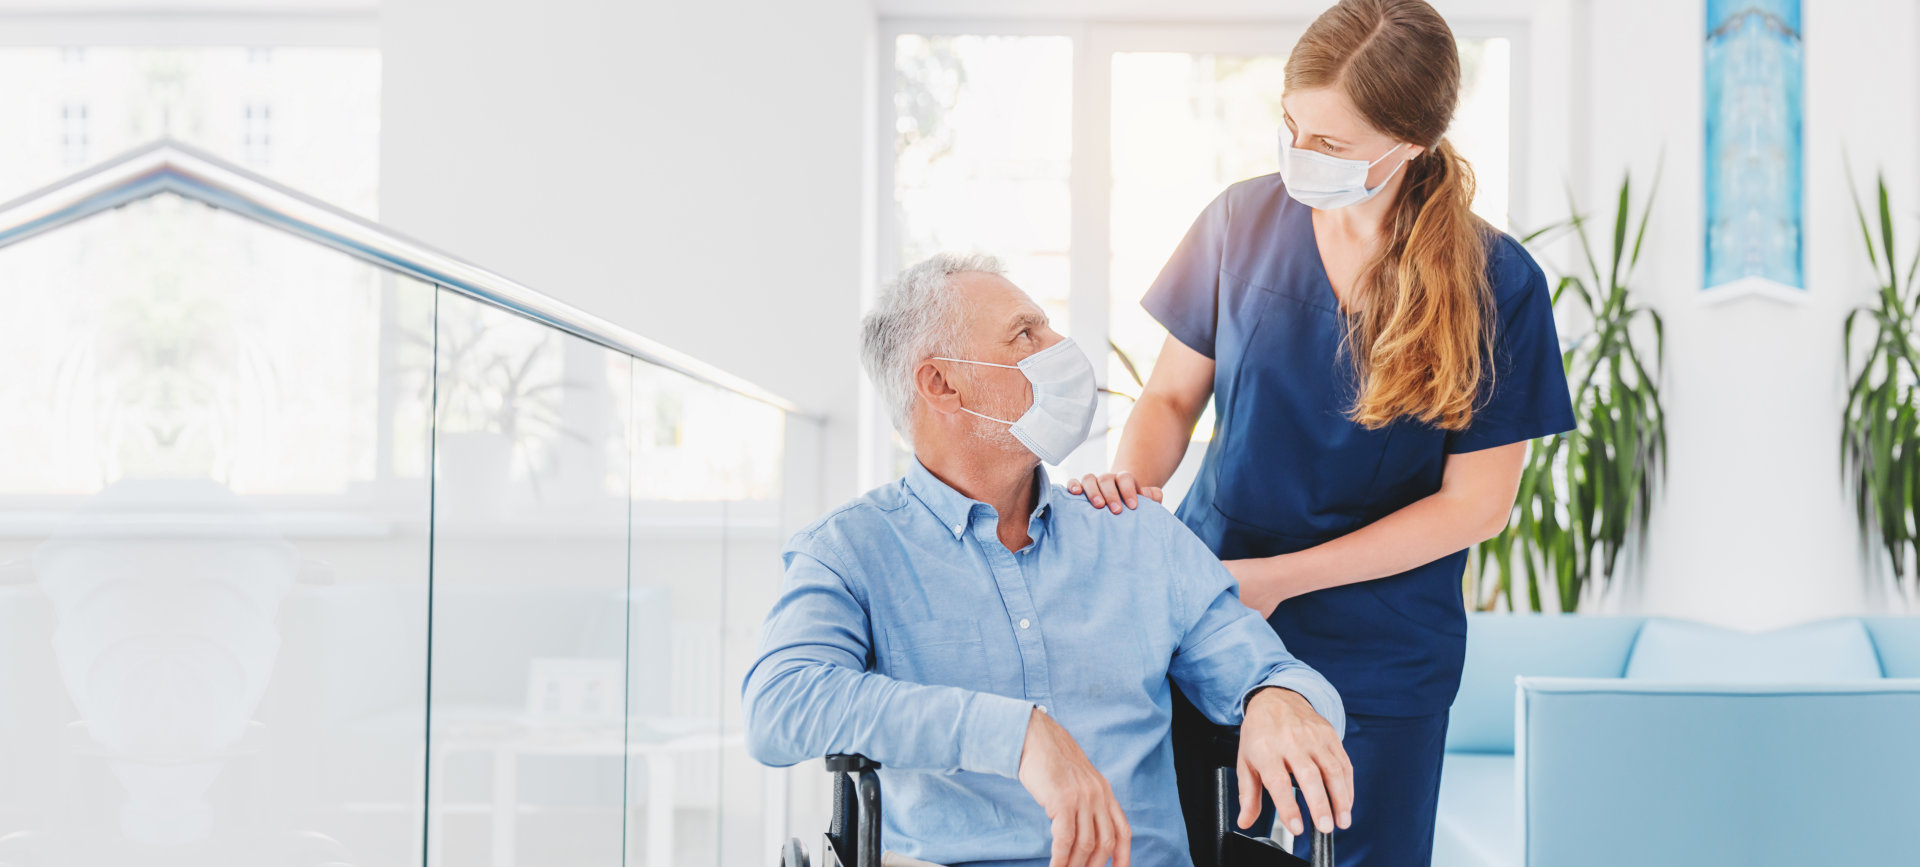 Young woman nurse explaining information to man patient in wheelchair in medical face mask while talking together in hospital.